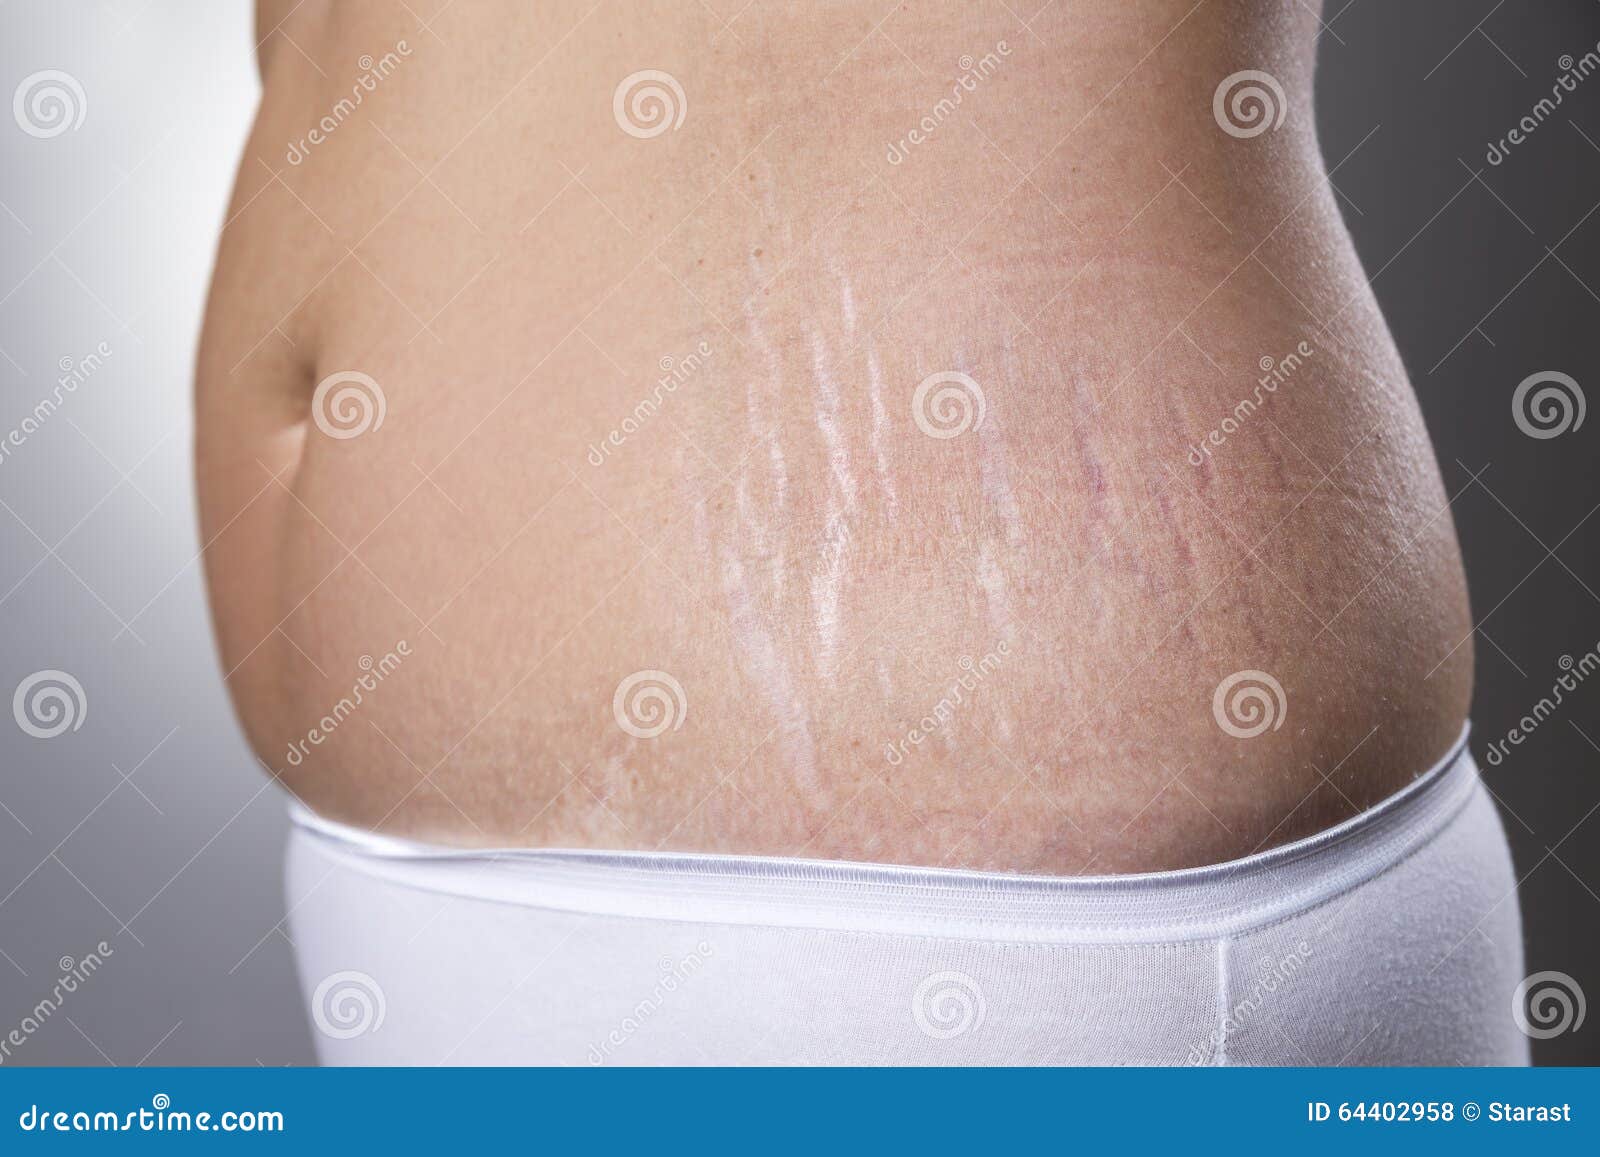 female belly with pregnancy stretch marks closeup